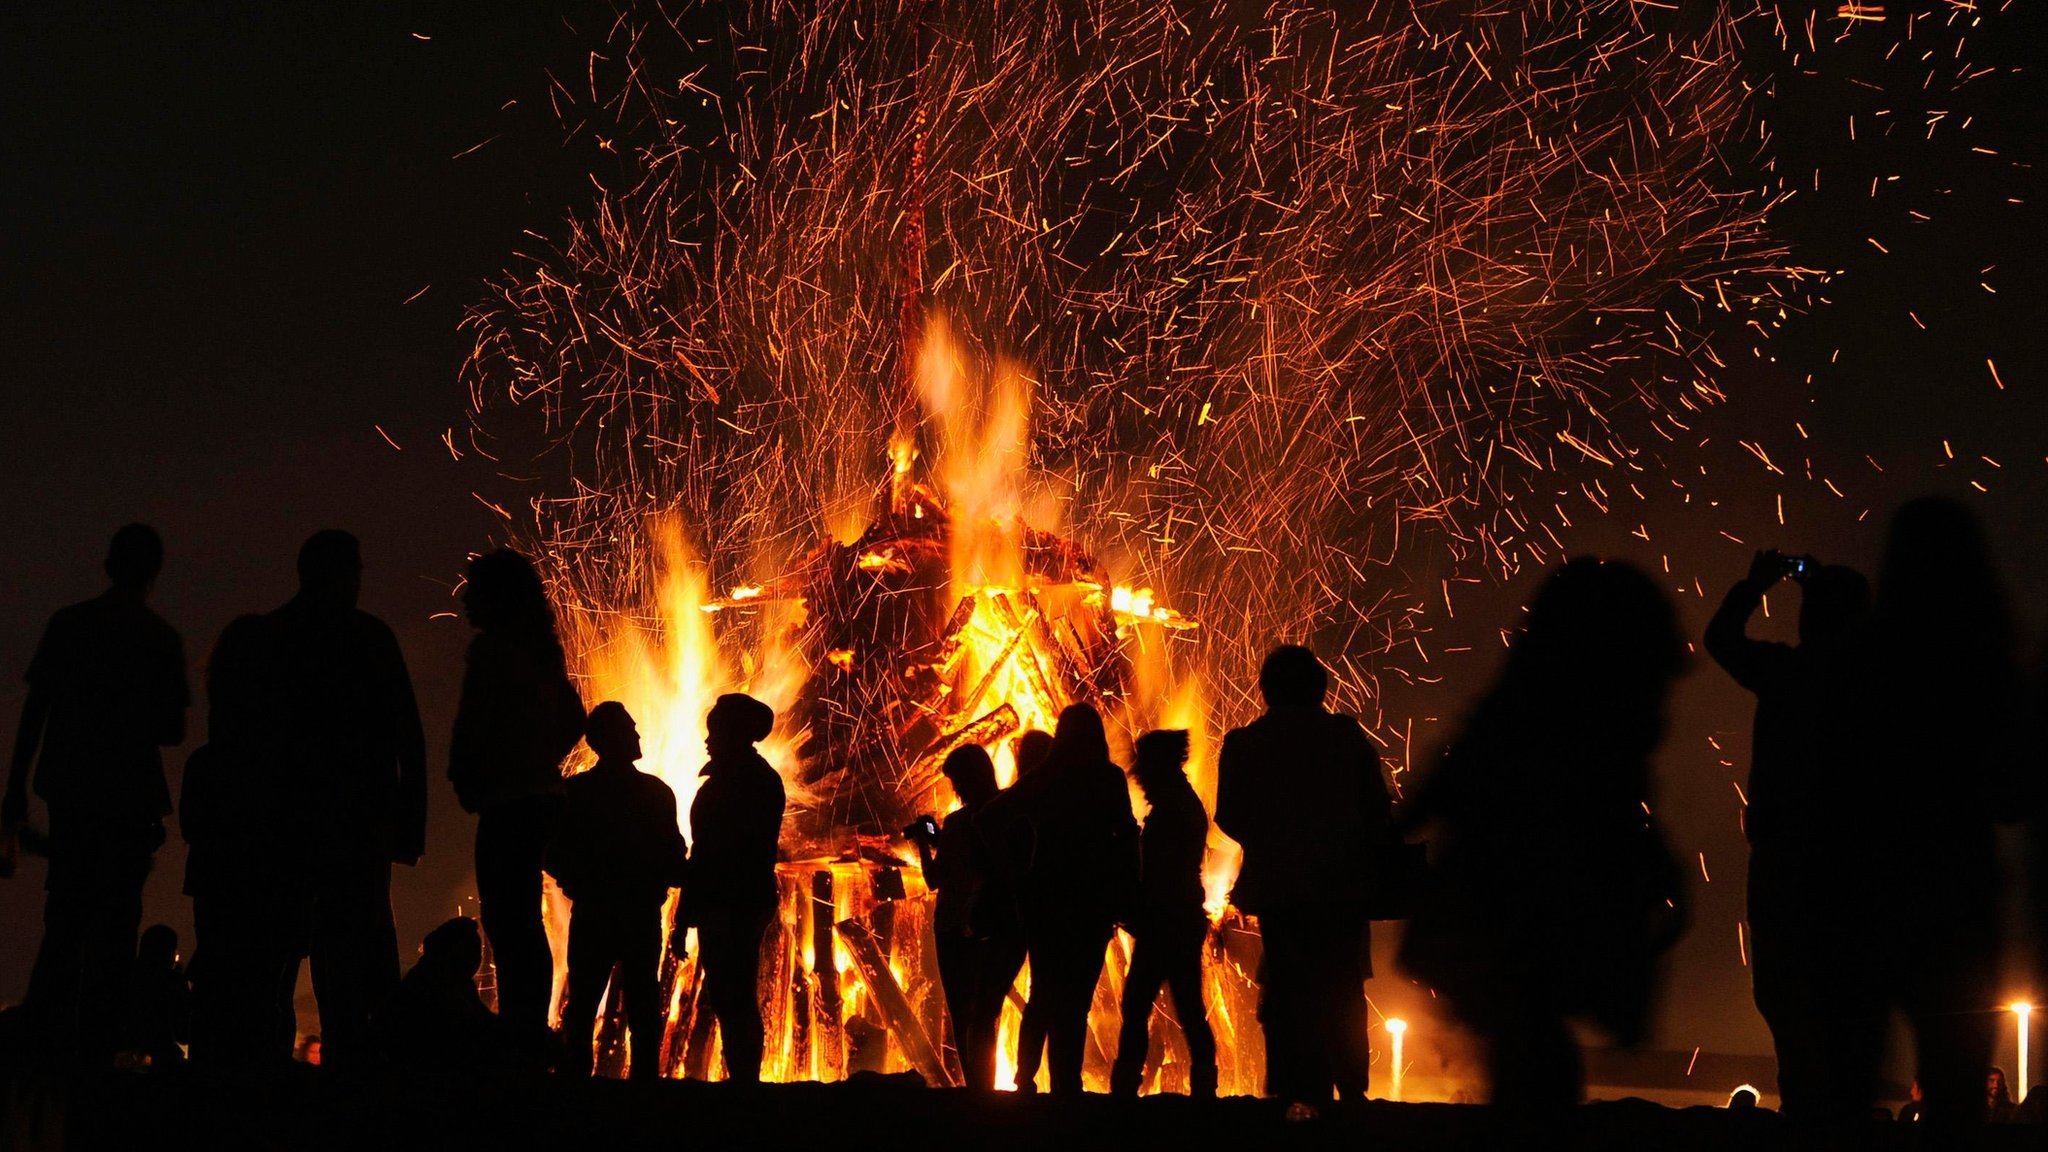 Bonfire Night: What is the story behind it? - CBBC Newsround